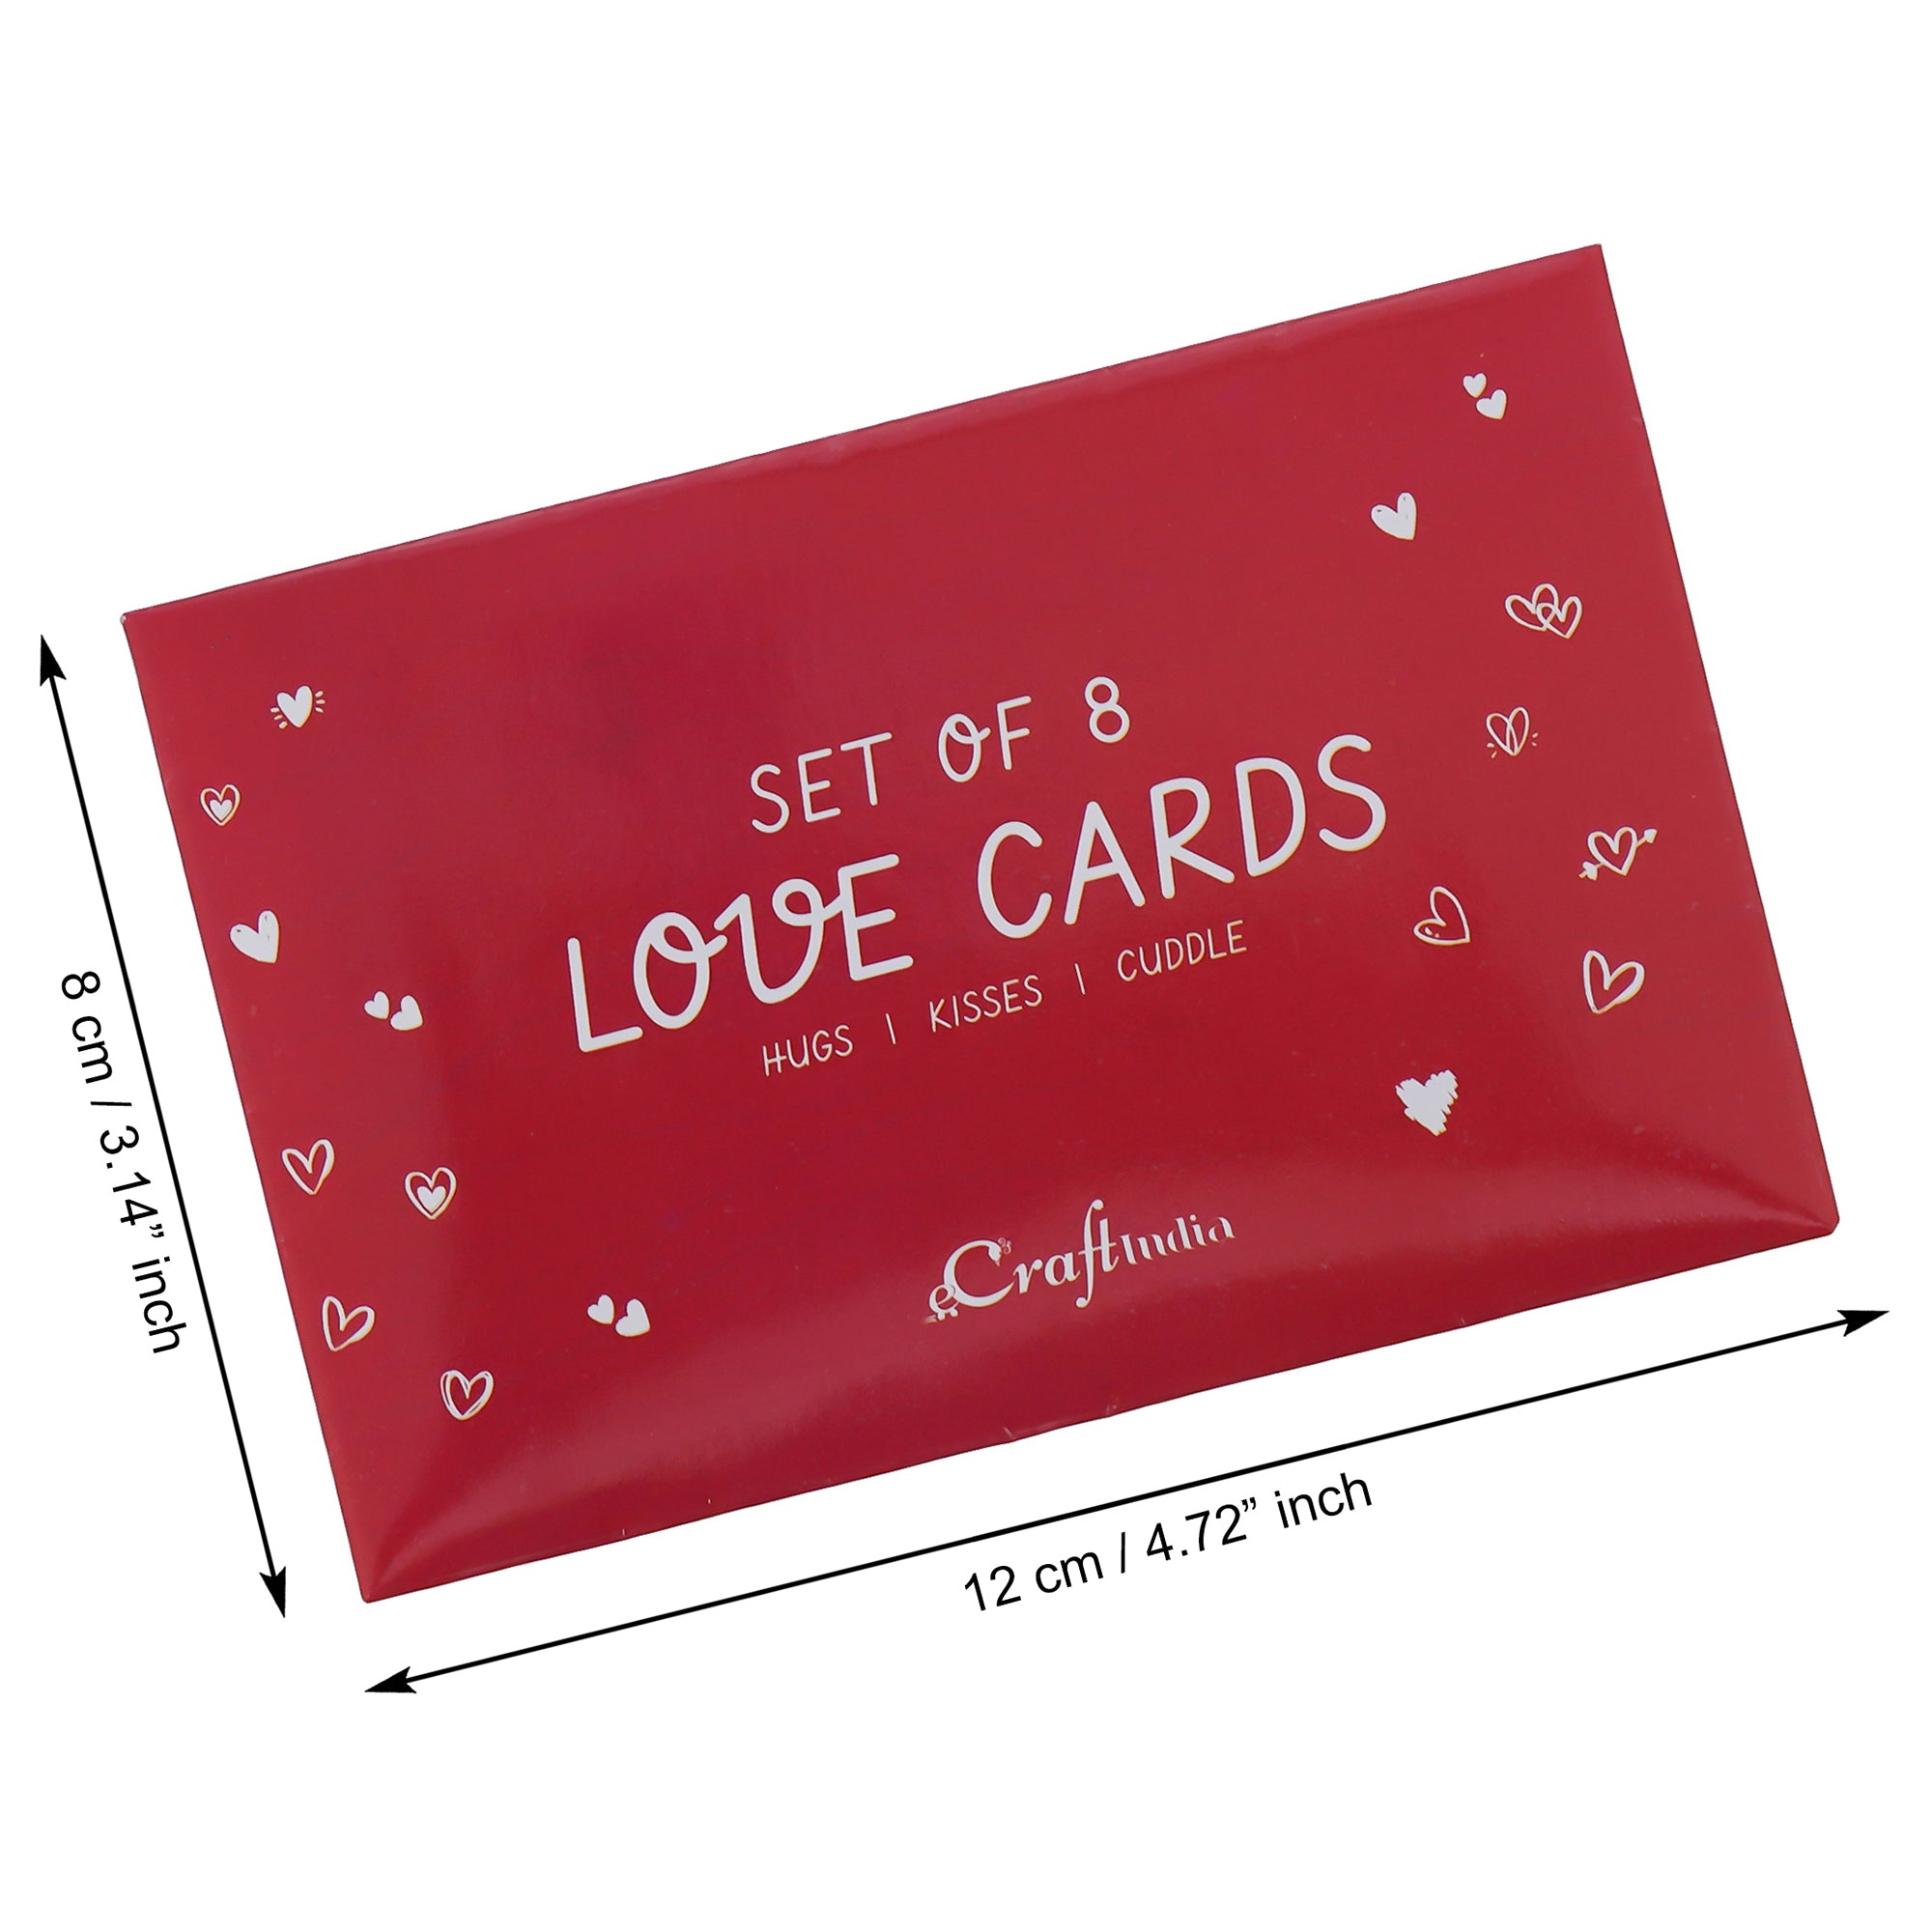 Valentine Combo of Pack of 8 Love Gift Cards, "20 Reasons Why I Love You" Printed on Little Red Hearts Decorative Wooden Gift Set Box, Red Roses Bouquet and White, Red Teddy Bear Valentine's Rectangle Shaped Gift Box 2